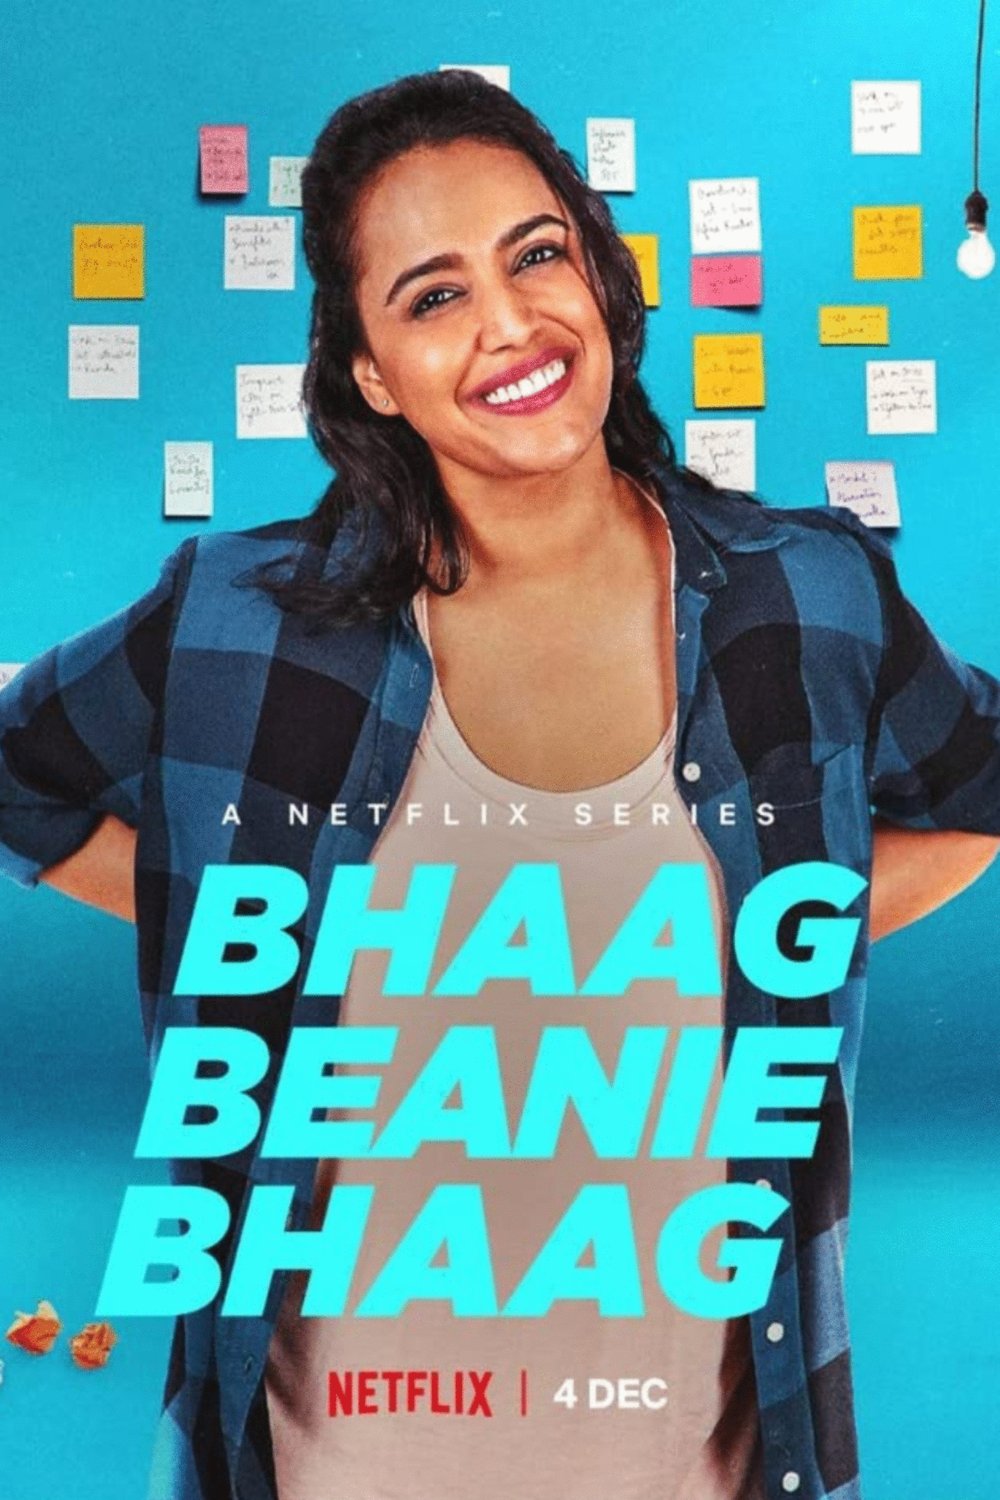 Hindi poster of the movie Bhaag Beanie Bhaag